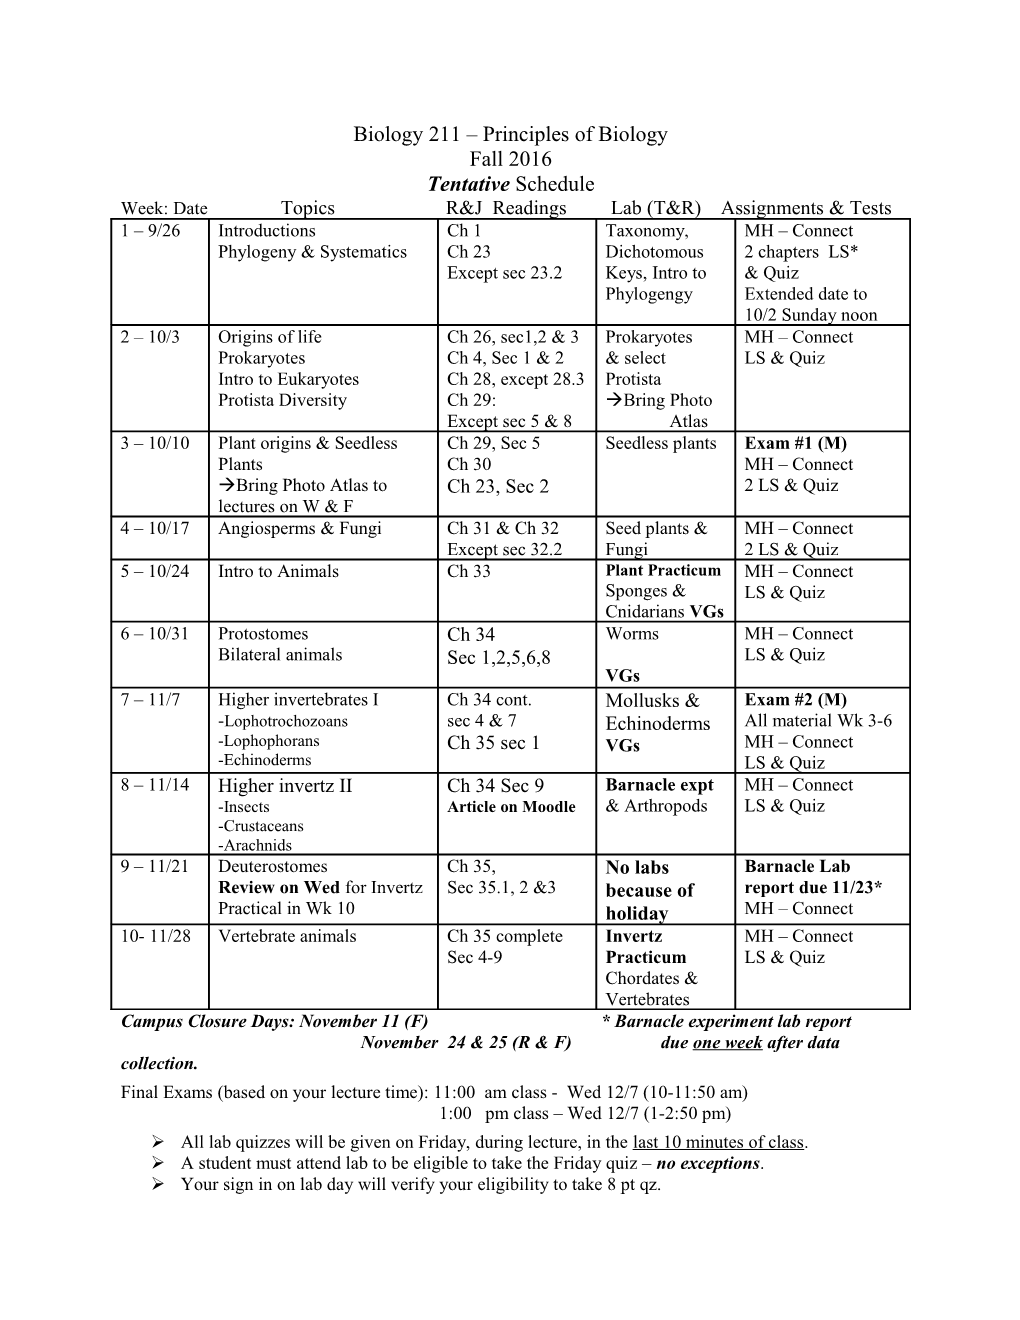 Week: Date Topics R&J Readings Lab (T&R)Assignments & Tests